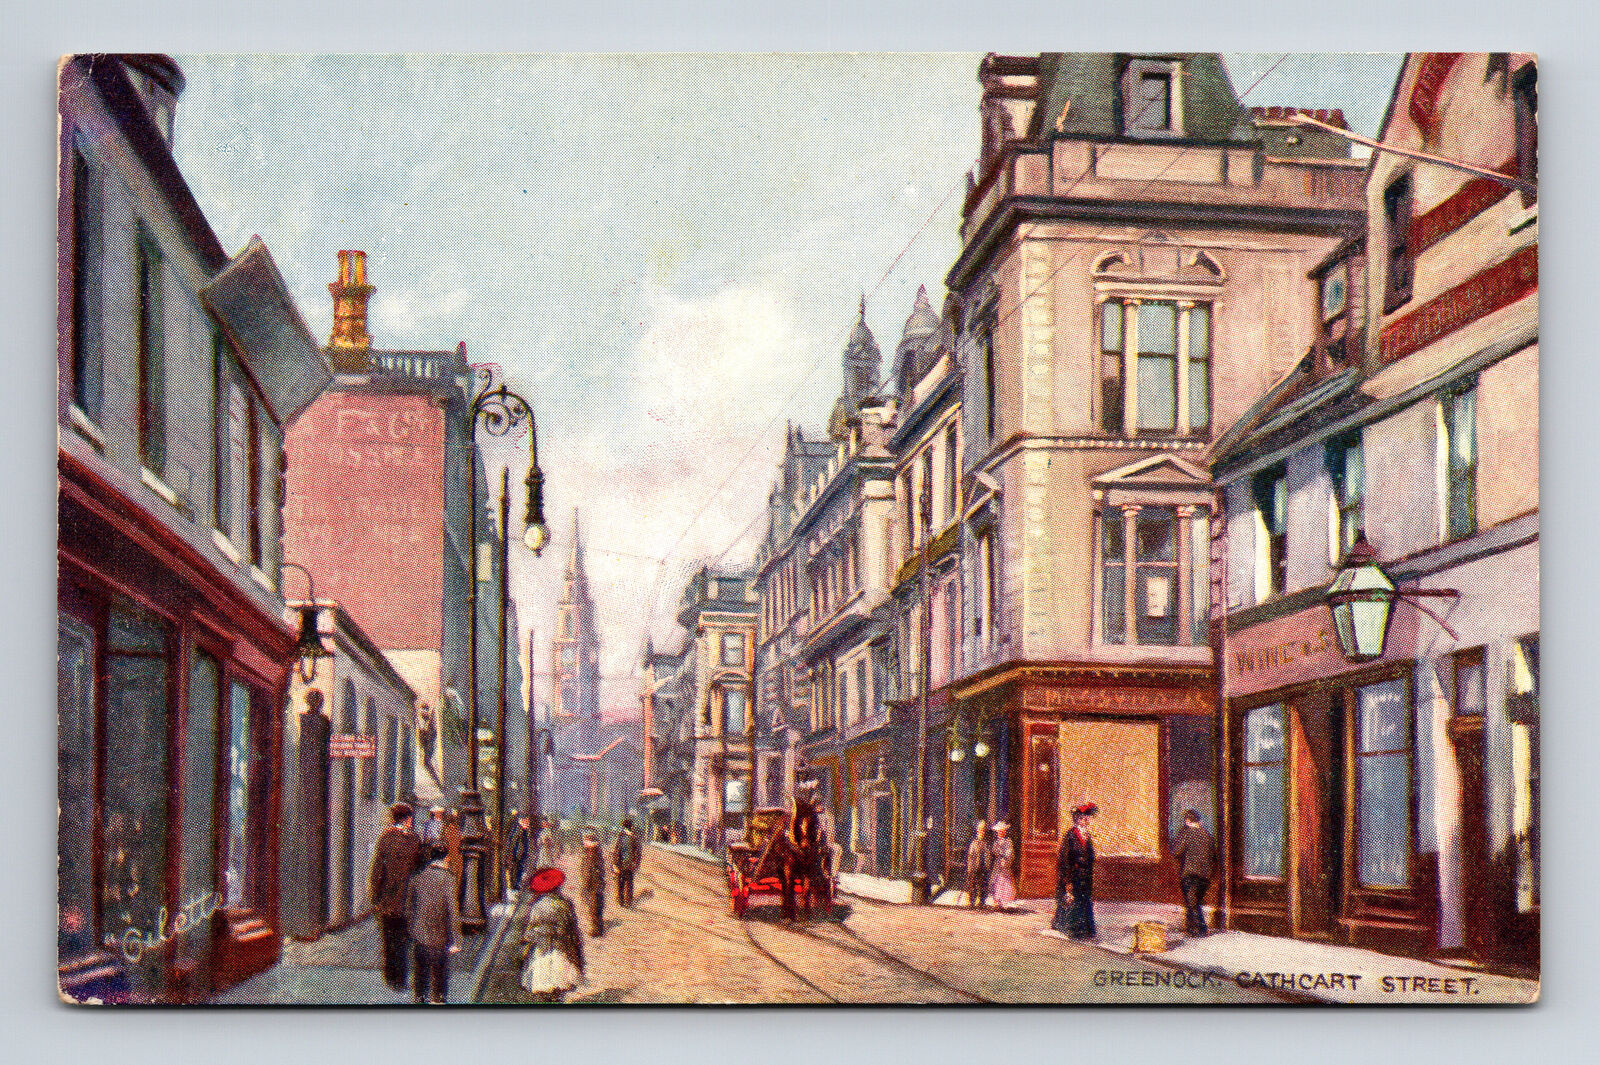 Cathcart Street Greenock Scotland Clyde Watering Places Tuck's Oilette Postcard